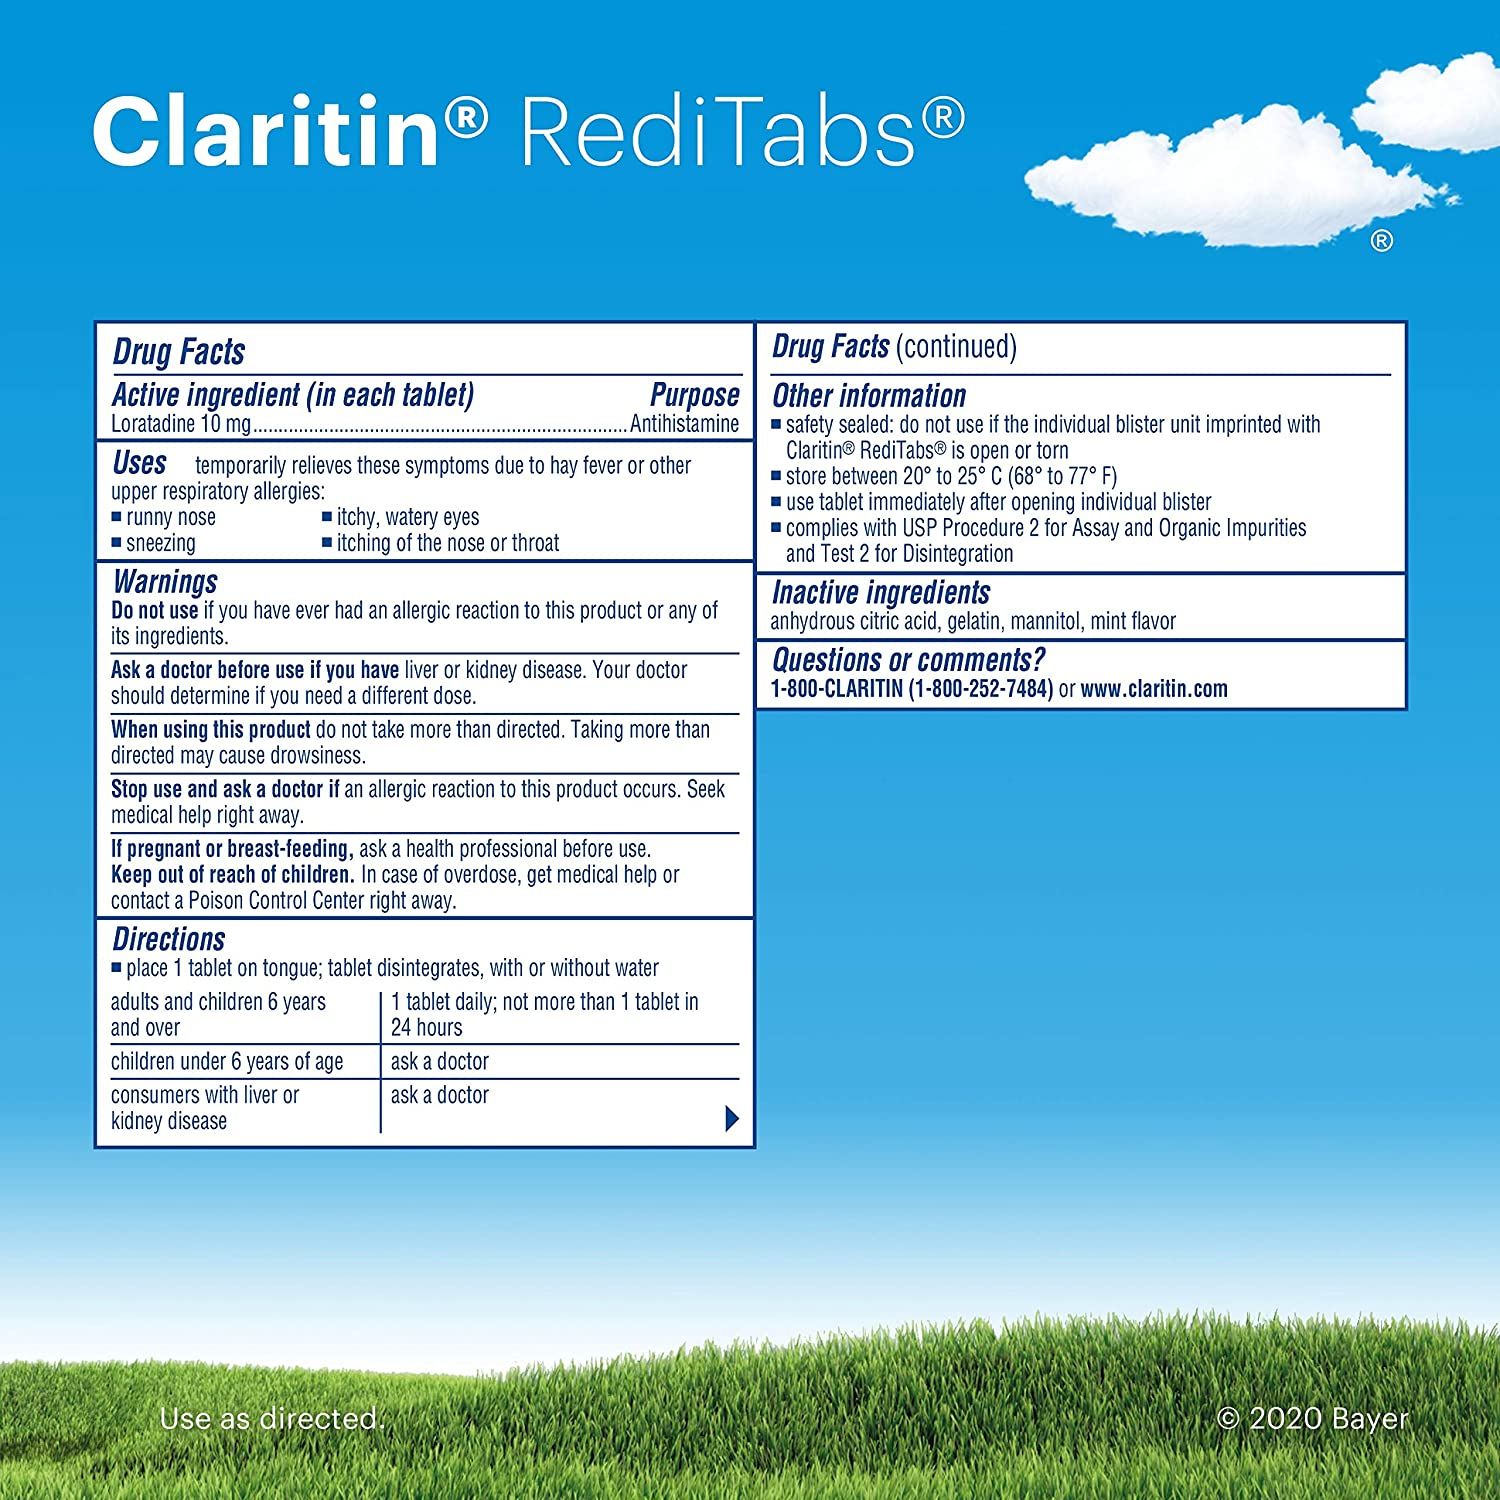 Claritin RediTabs Allergy Relief Orally Disintegrating Tablets - 10 ct